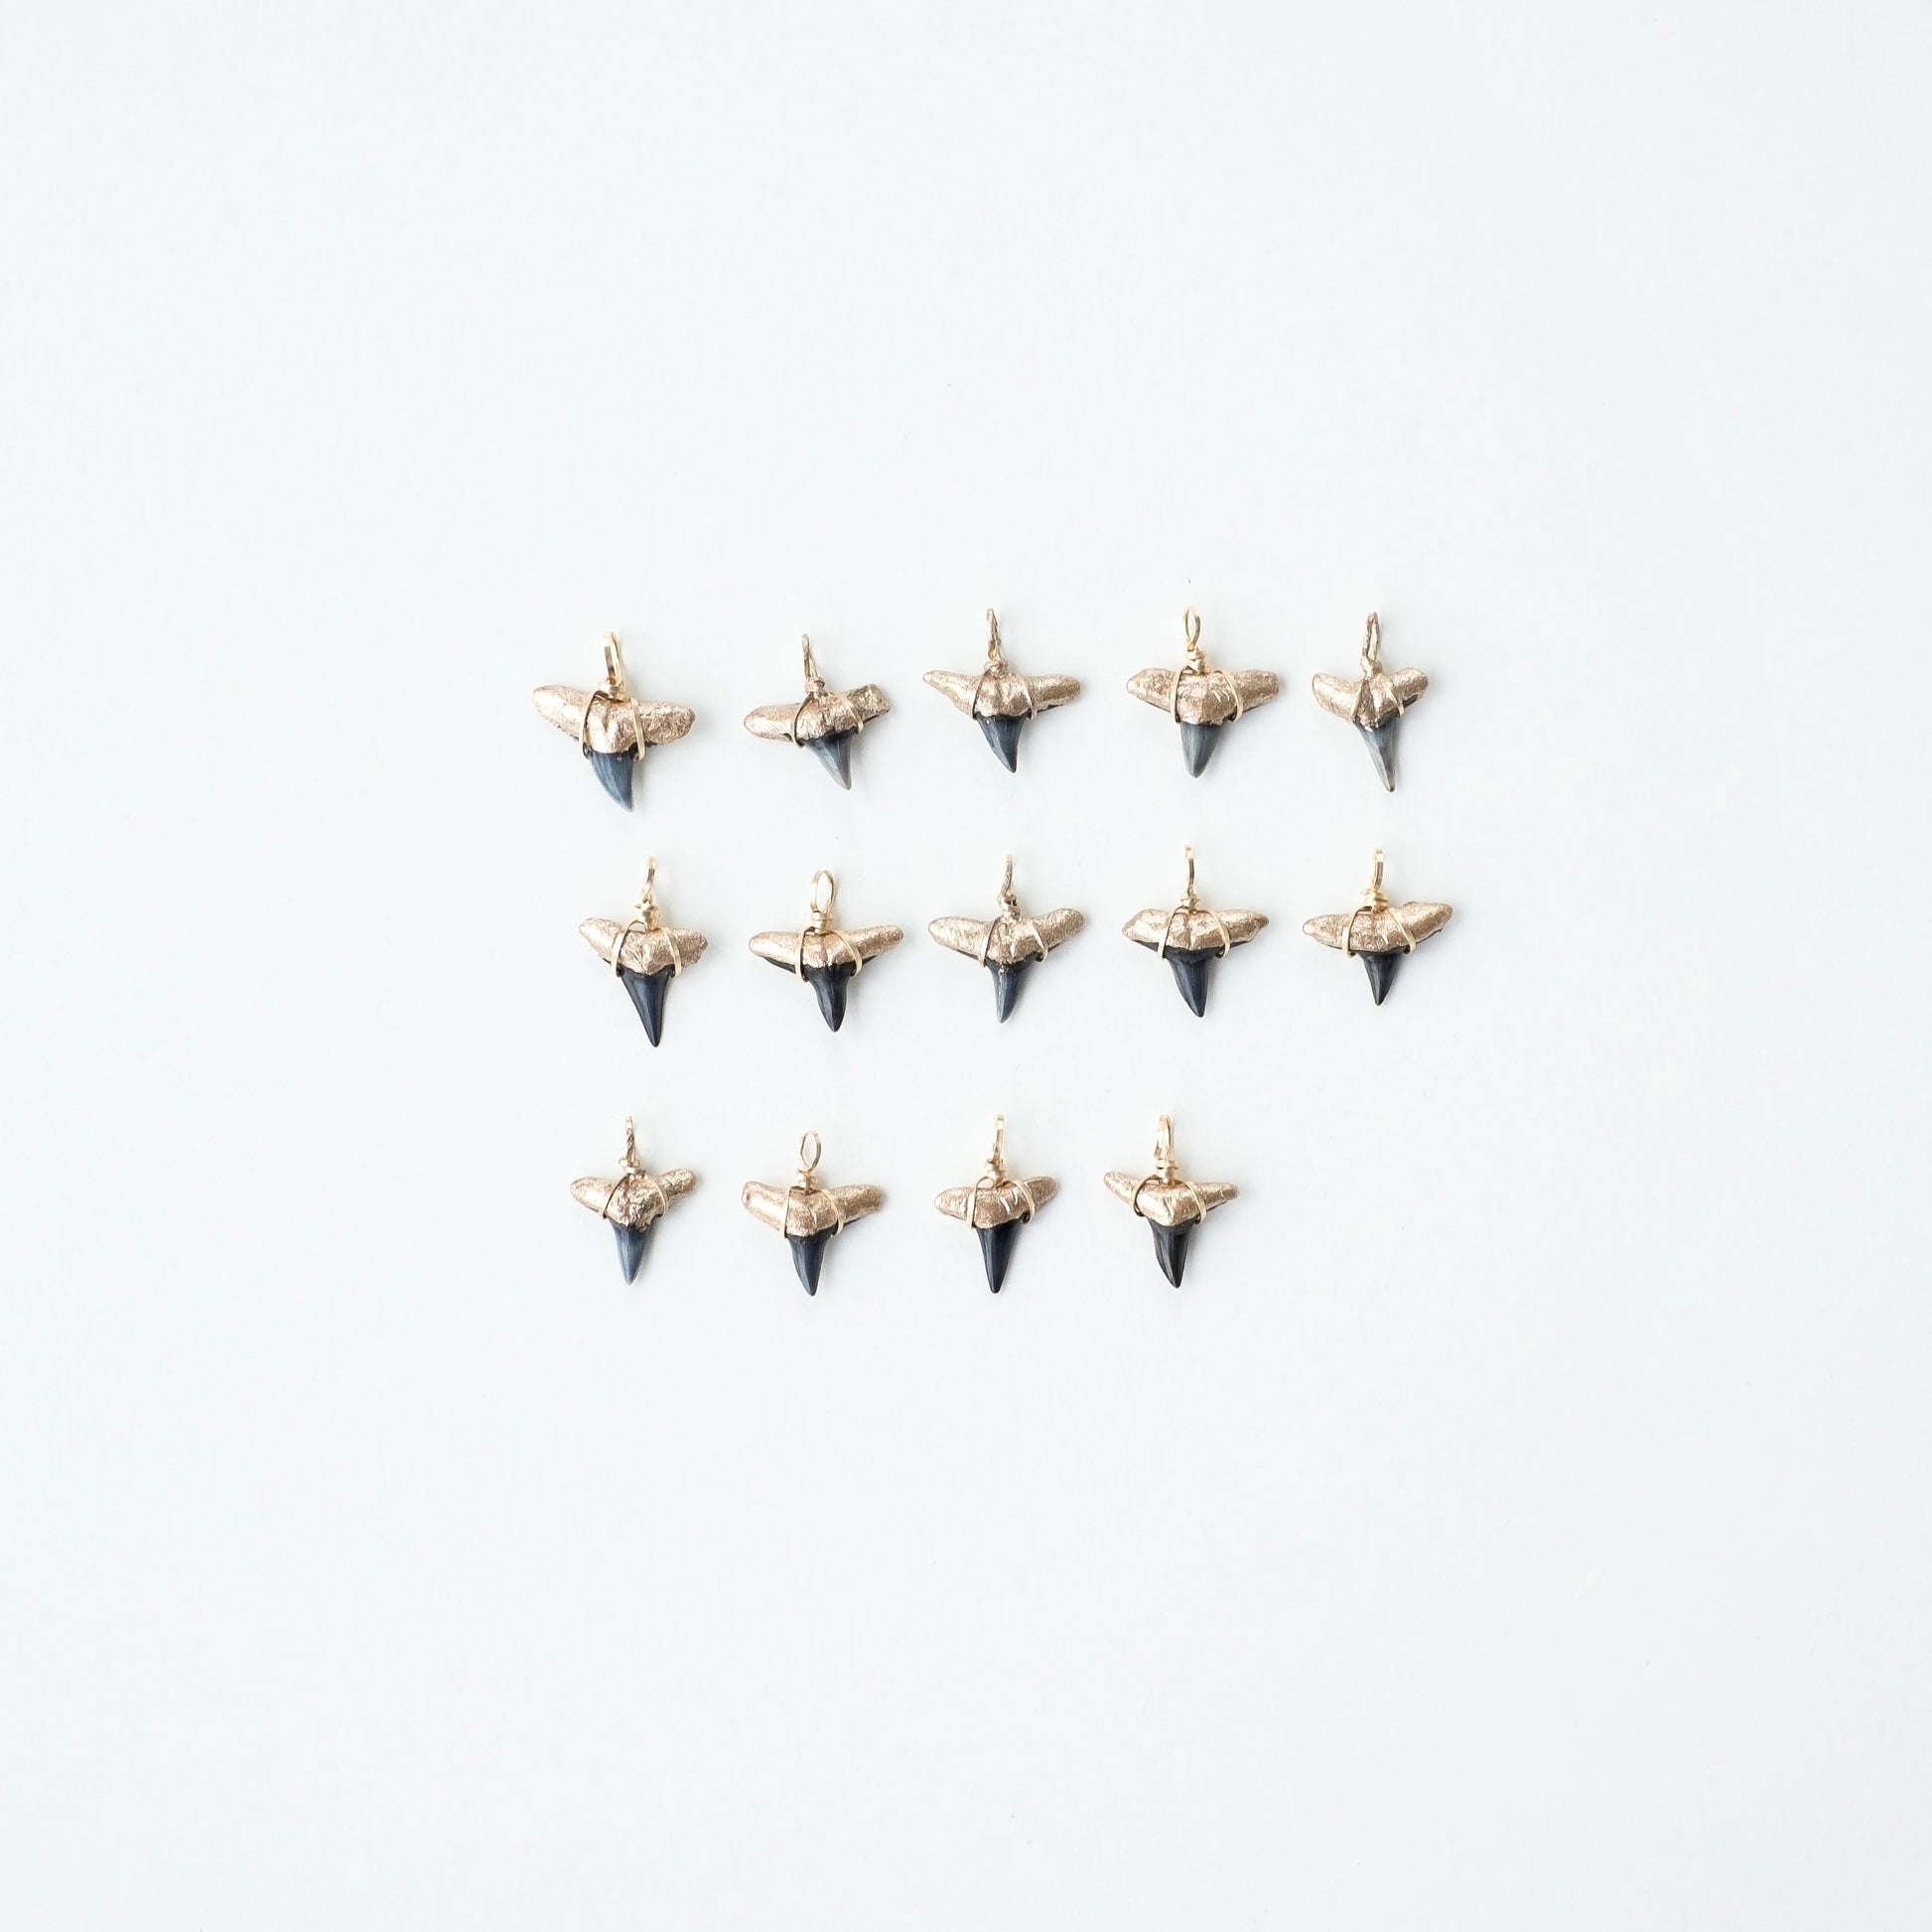 real shark tooth pendants in gold-prehistoric shark teeth gold dipped and wire wrapped into pendants for necklace